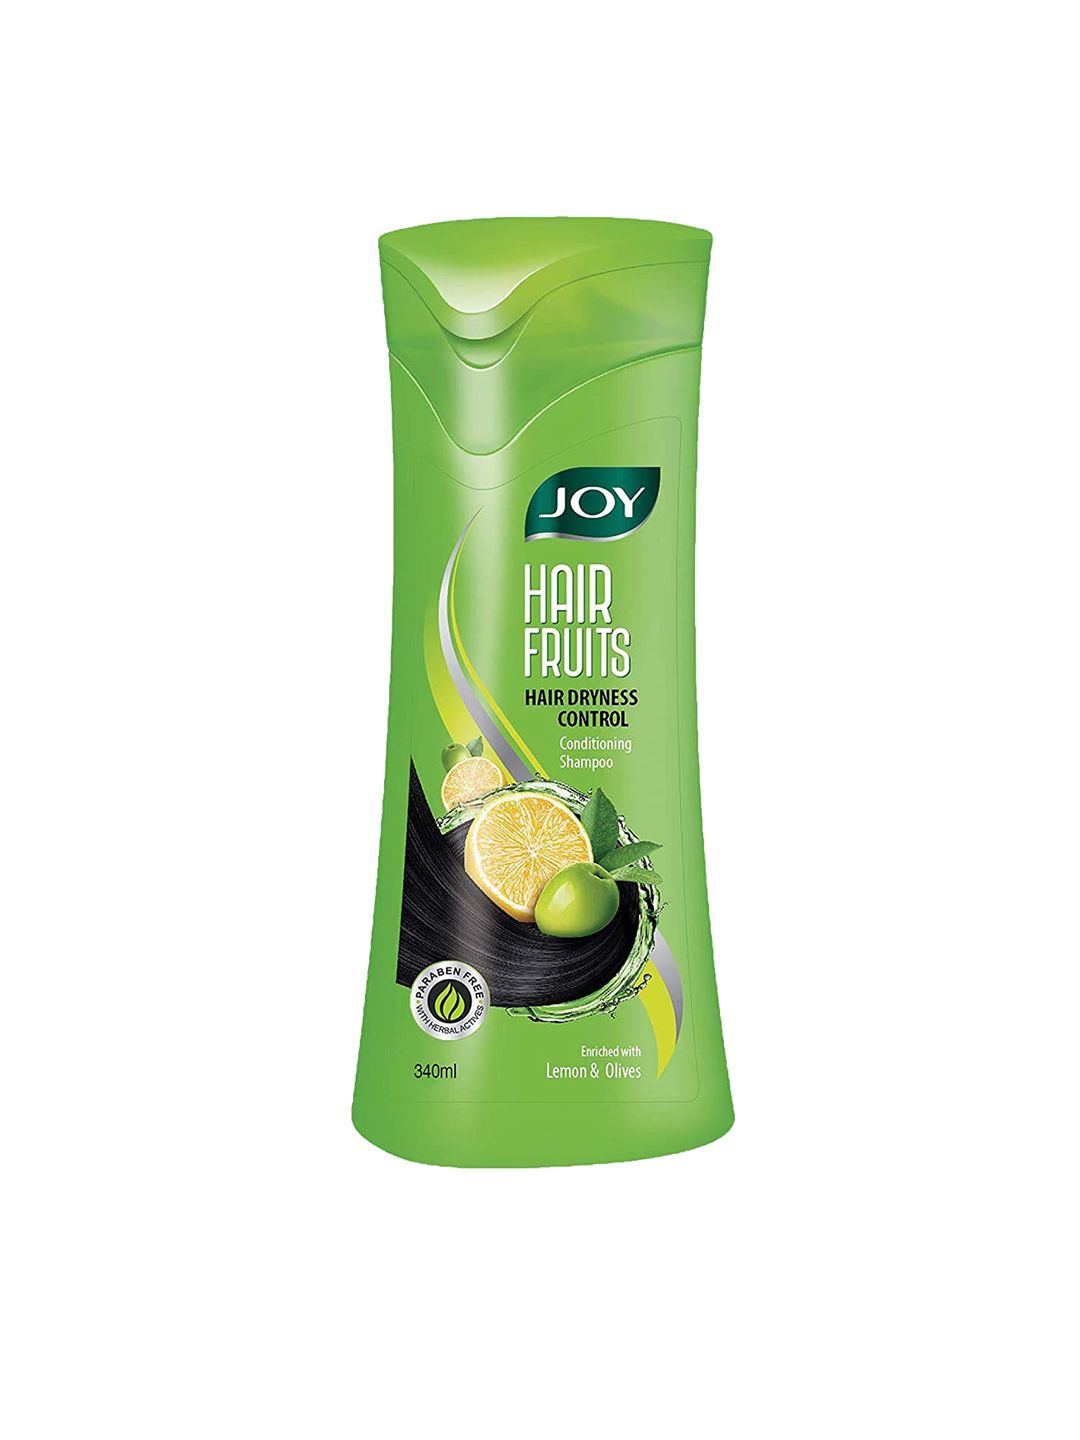 JOY Hair Fruits Dryness Control Conditioning Shampoo with Lemon & Olives - 340 ml Price in India